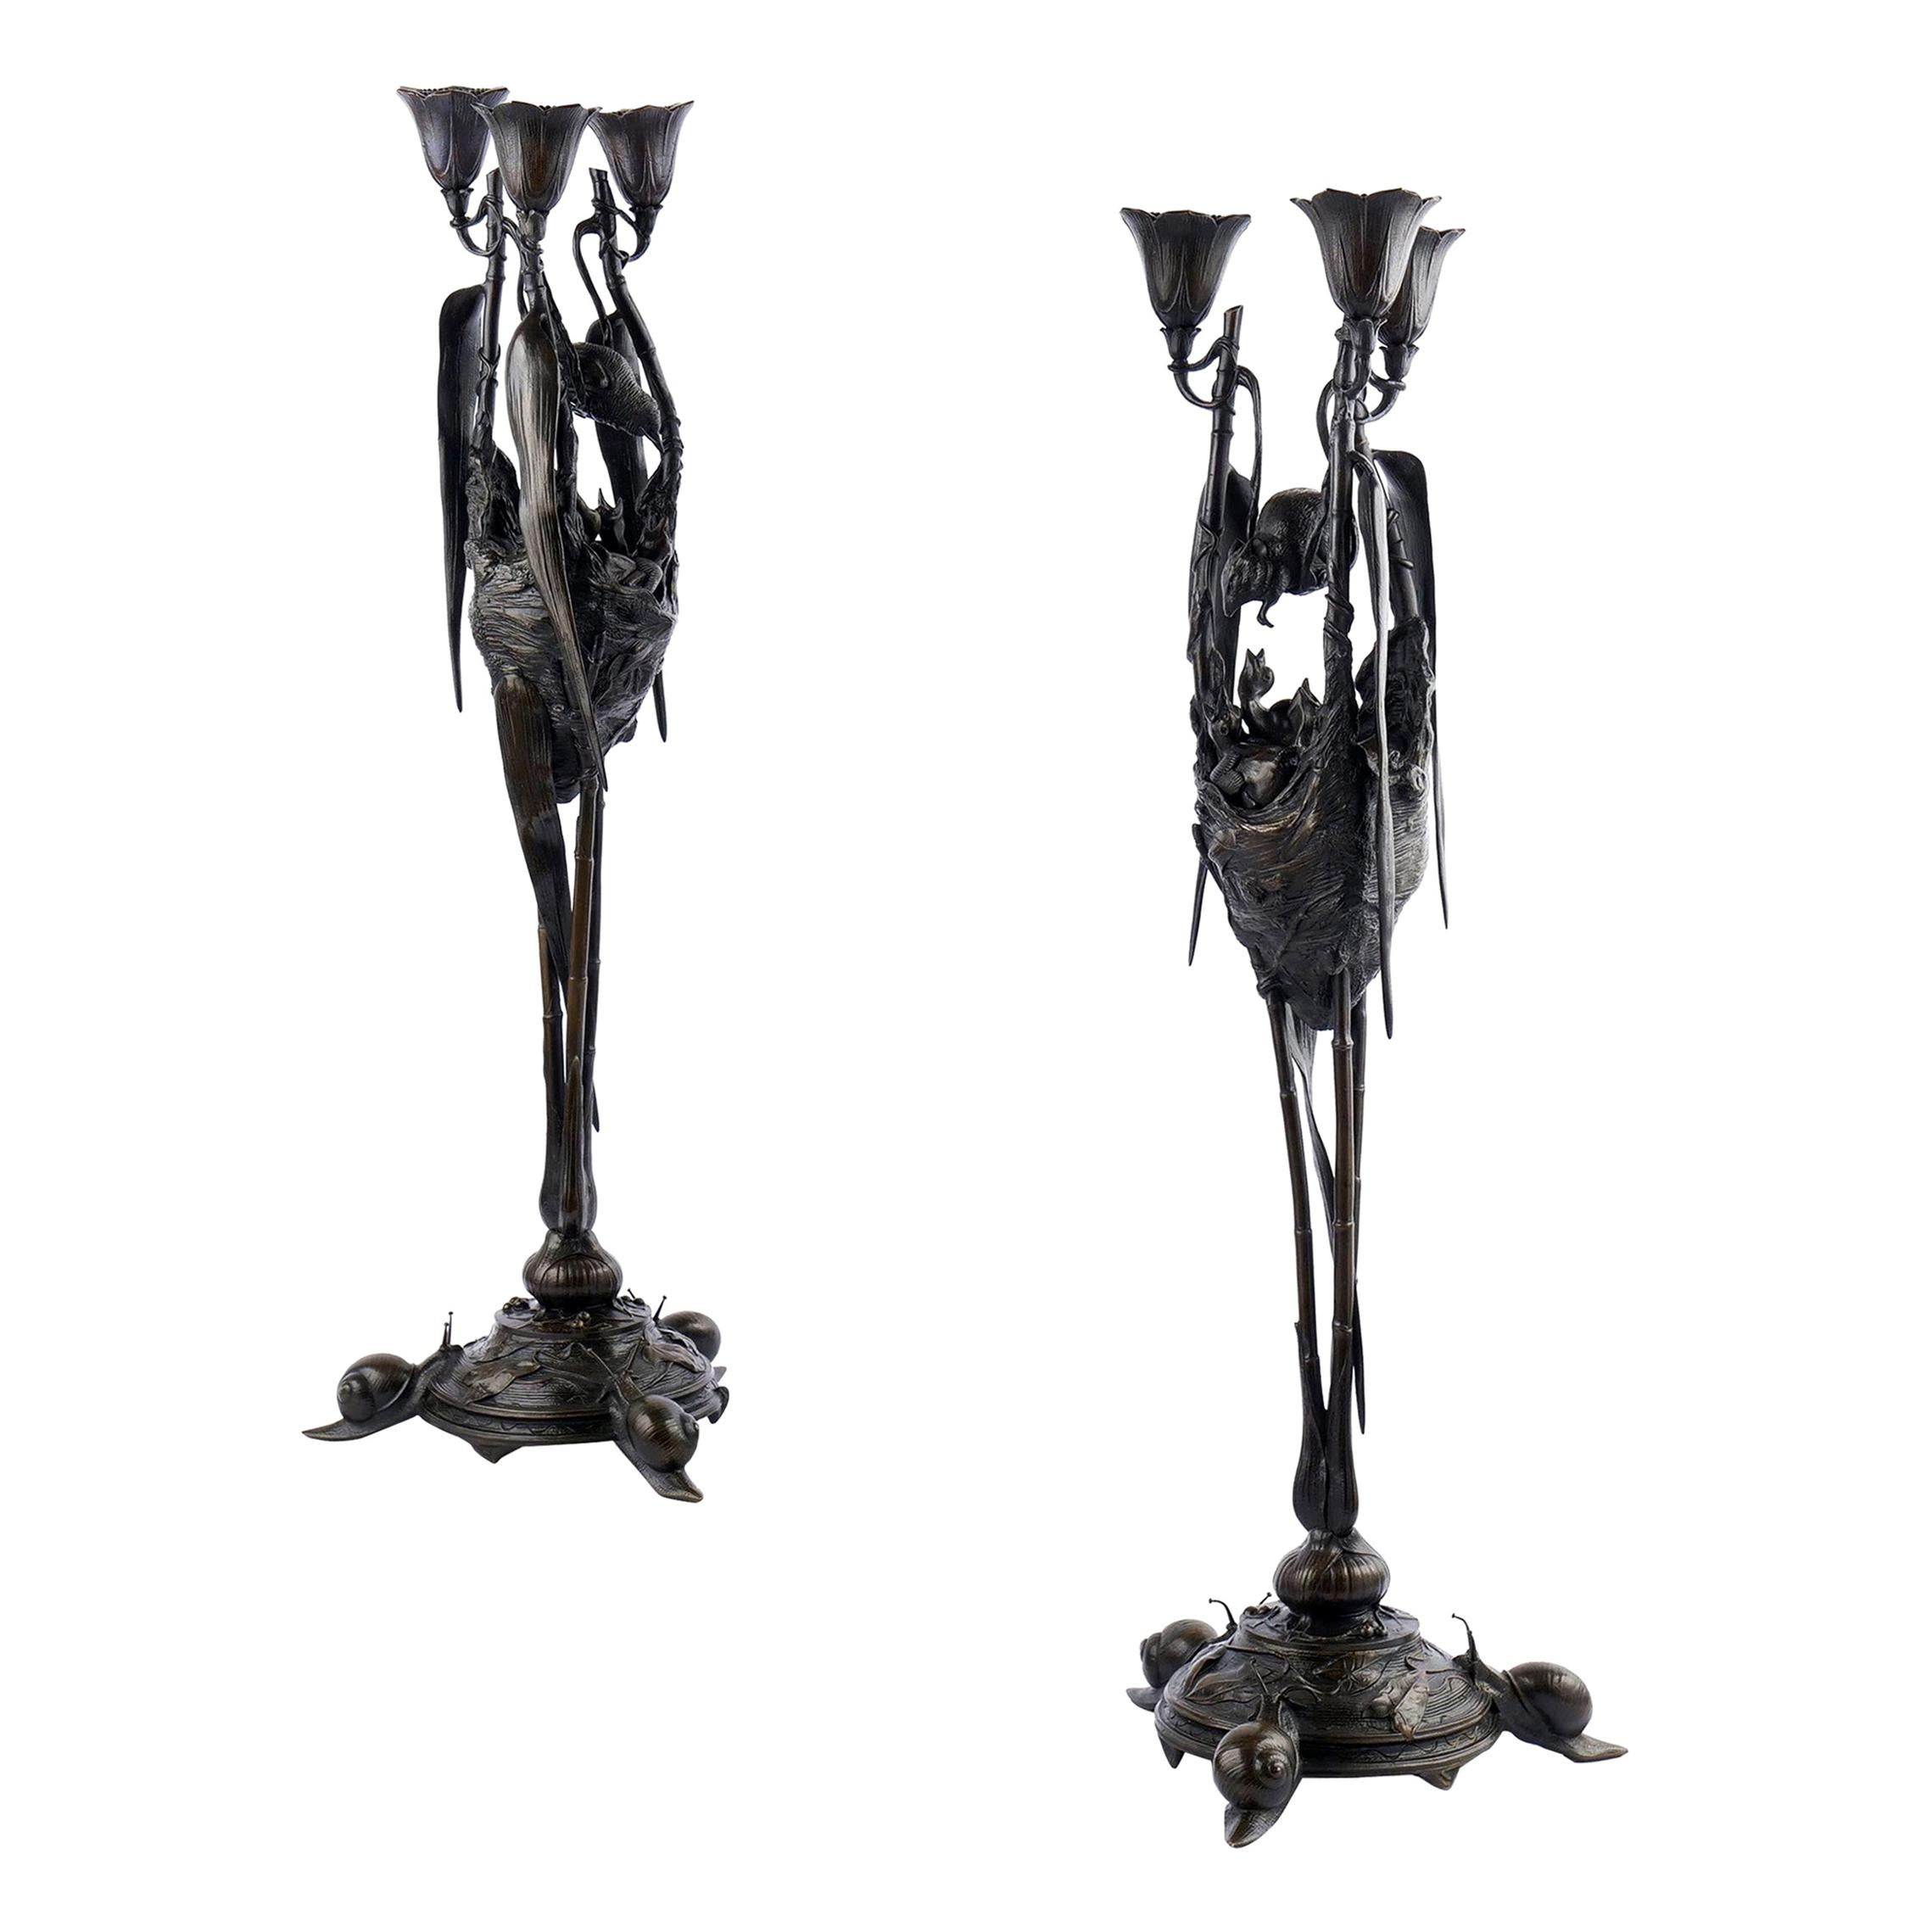 Rare Pair of French Antique Bronze Candelabra by Auguste Nicolas Cain